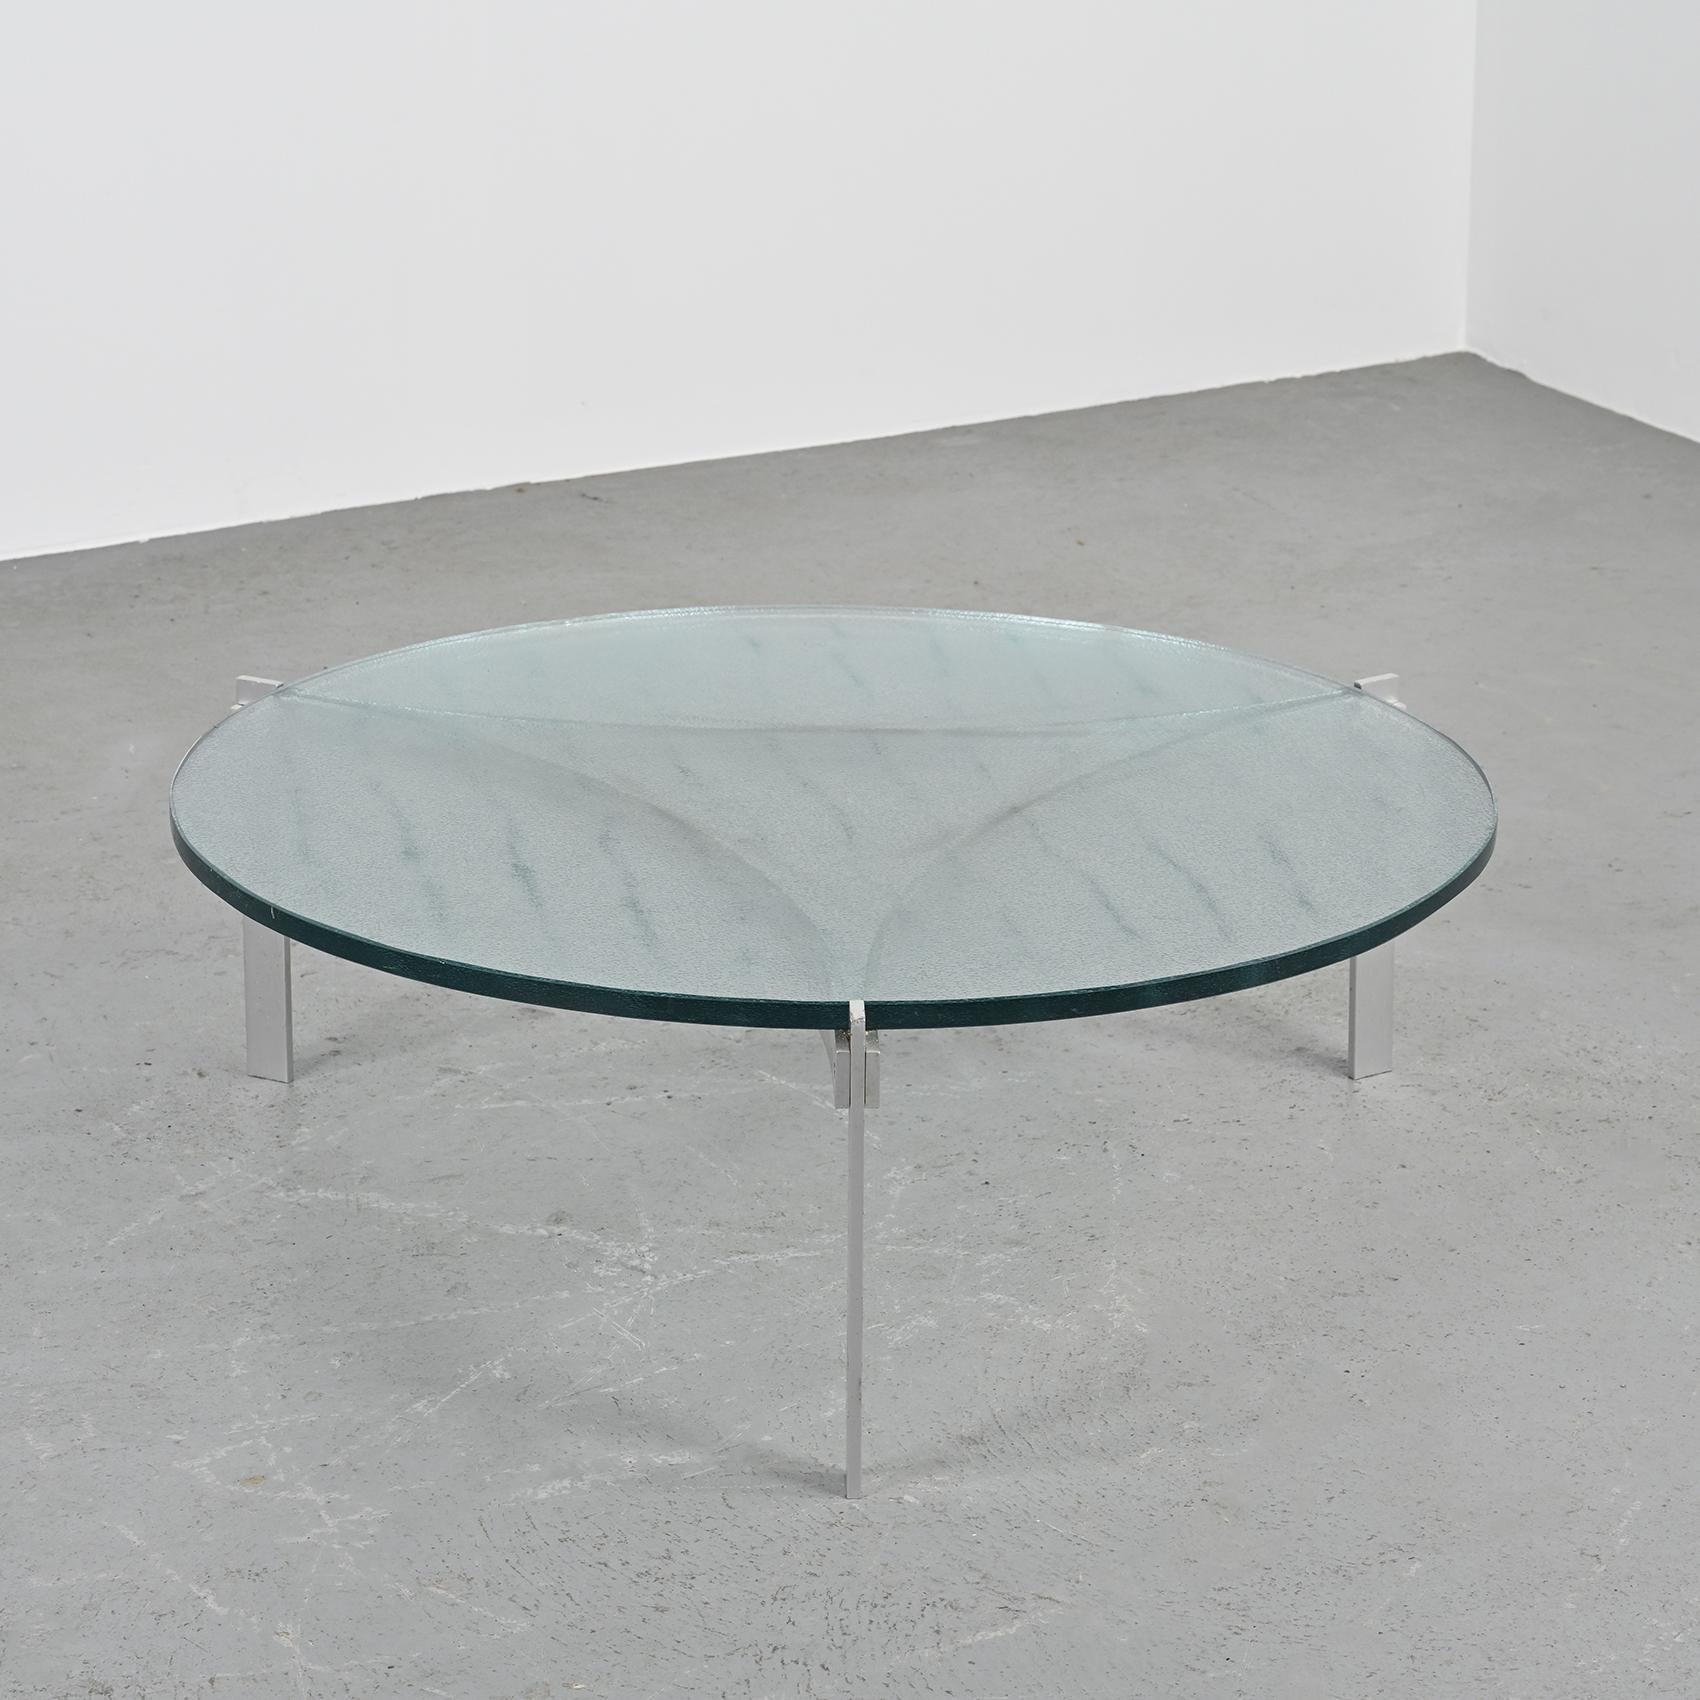 A coffee table by Teo Jakob, a rare find from the 1960s, will add a touch of vintage charm to any space.

This low, three-legged table is made of aluminum, with interconnected plates forming its base. It is topped with a thick glass top cast on a